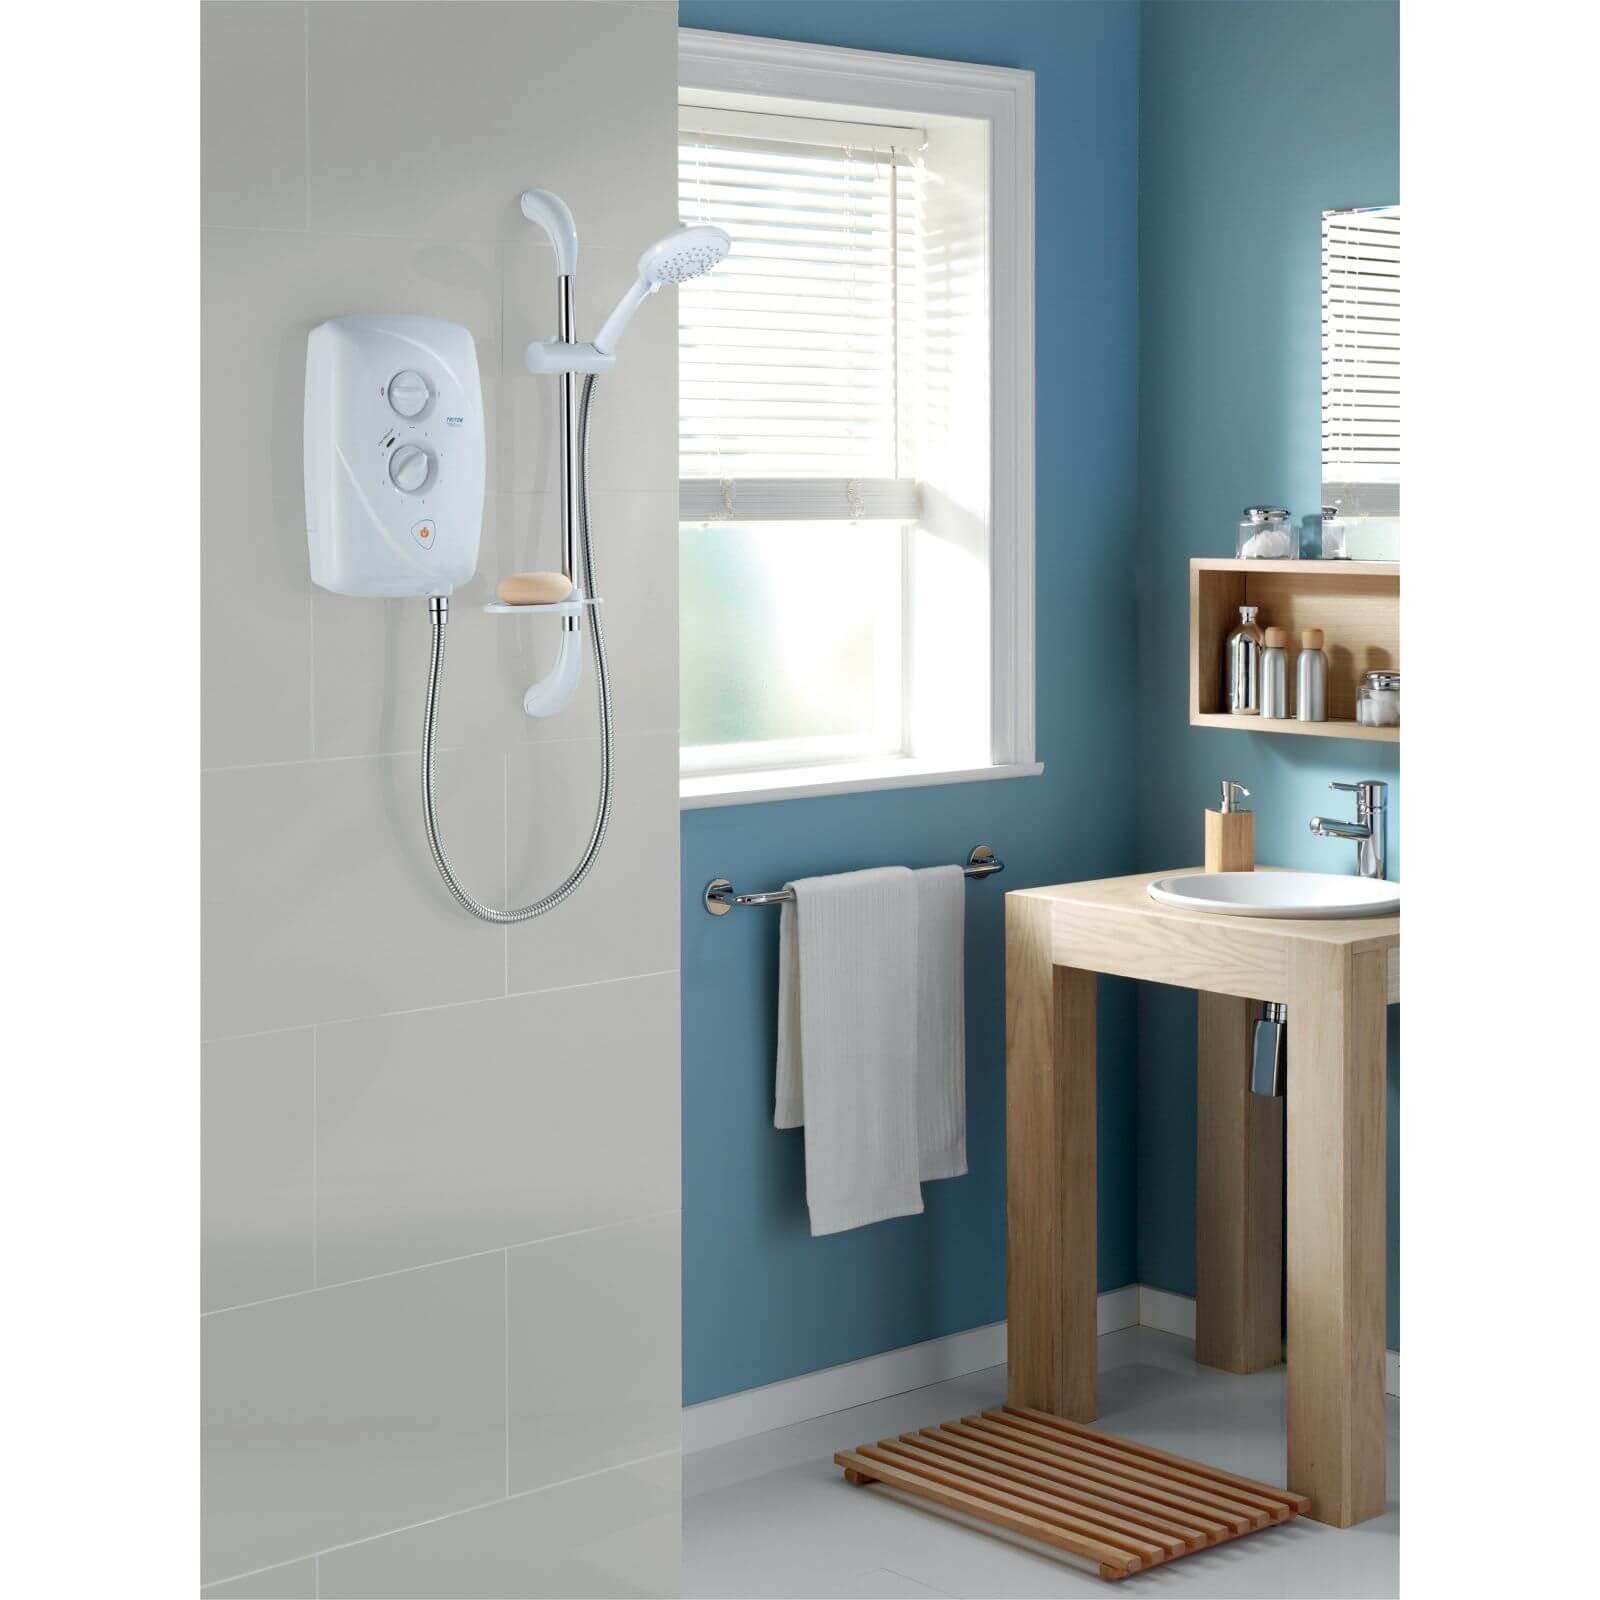 Triton T80Easi-Fit 8.5kW Electric Shower - White